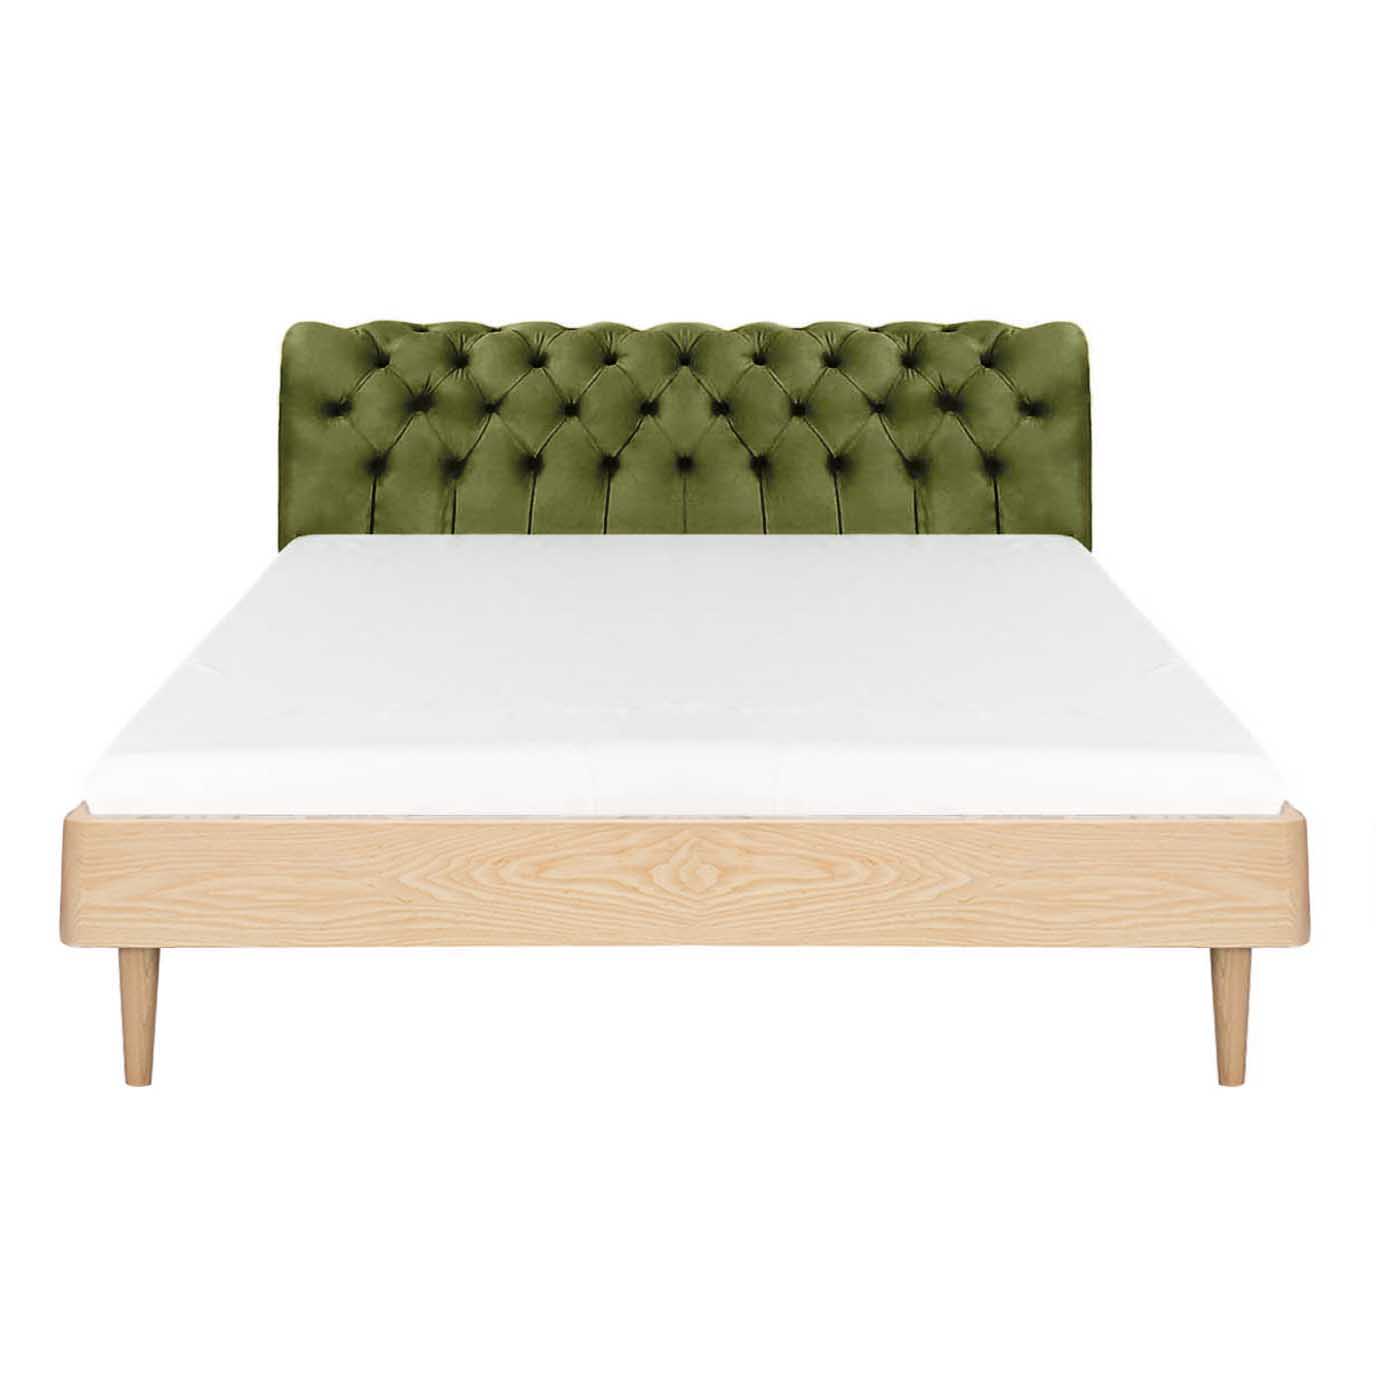 Chesterfield Olive Stitch Light King Bed